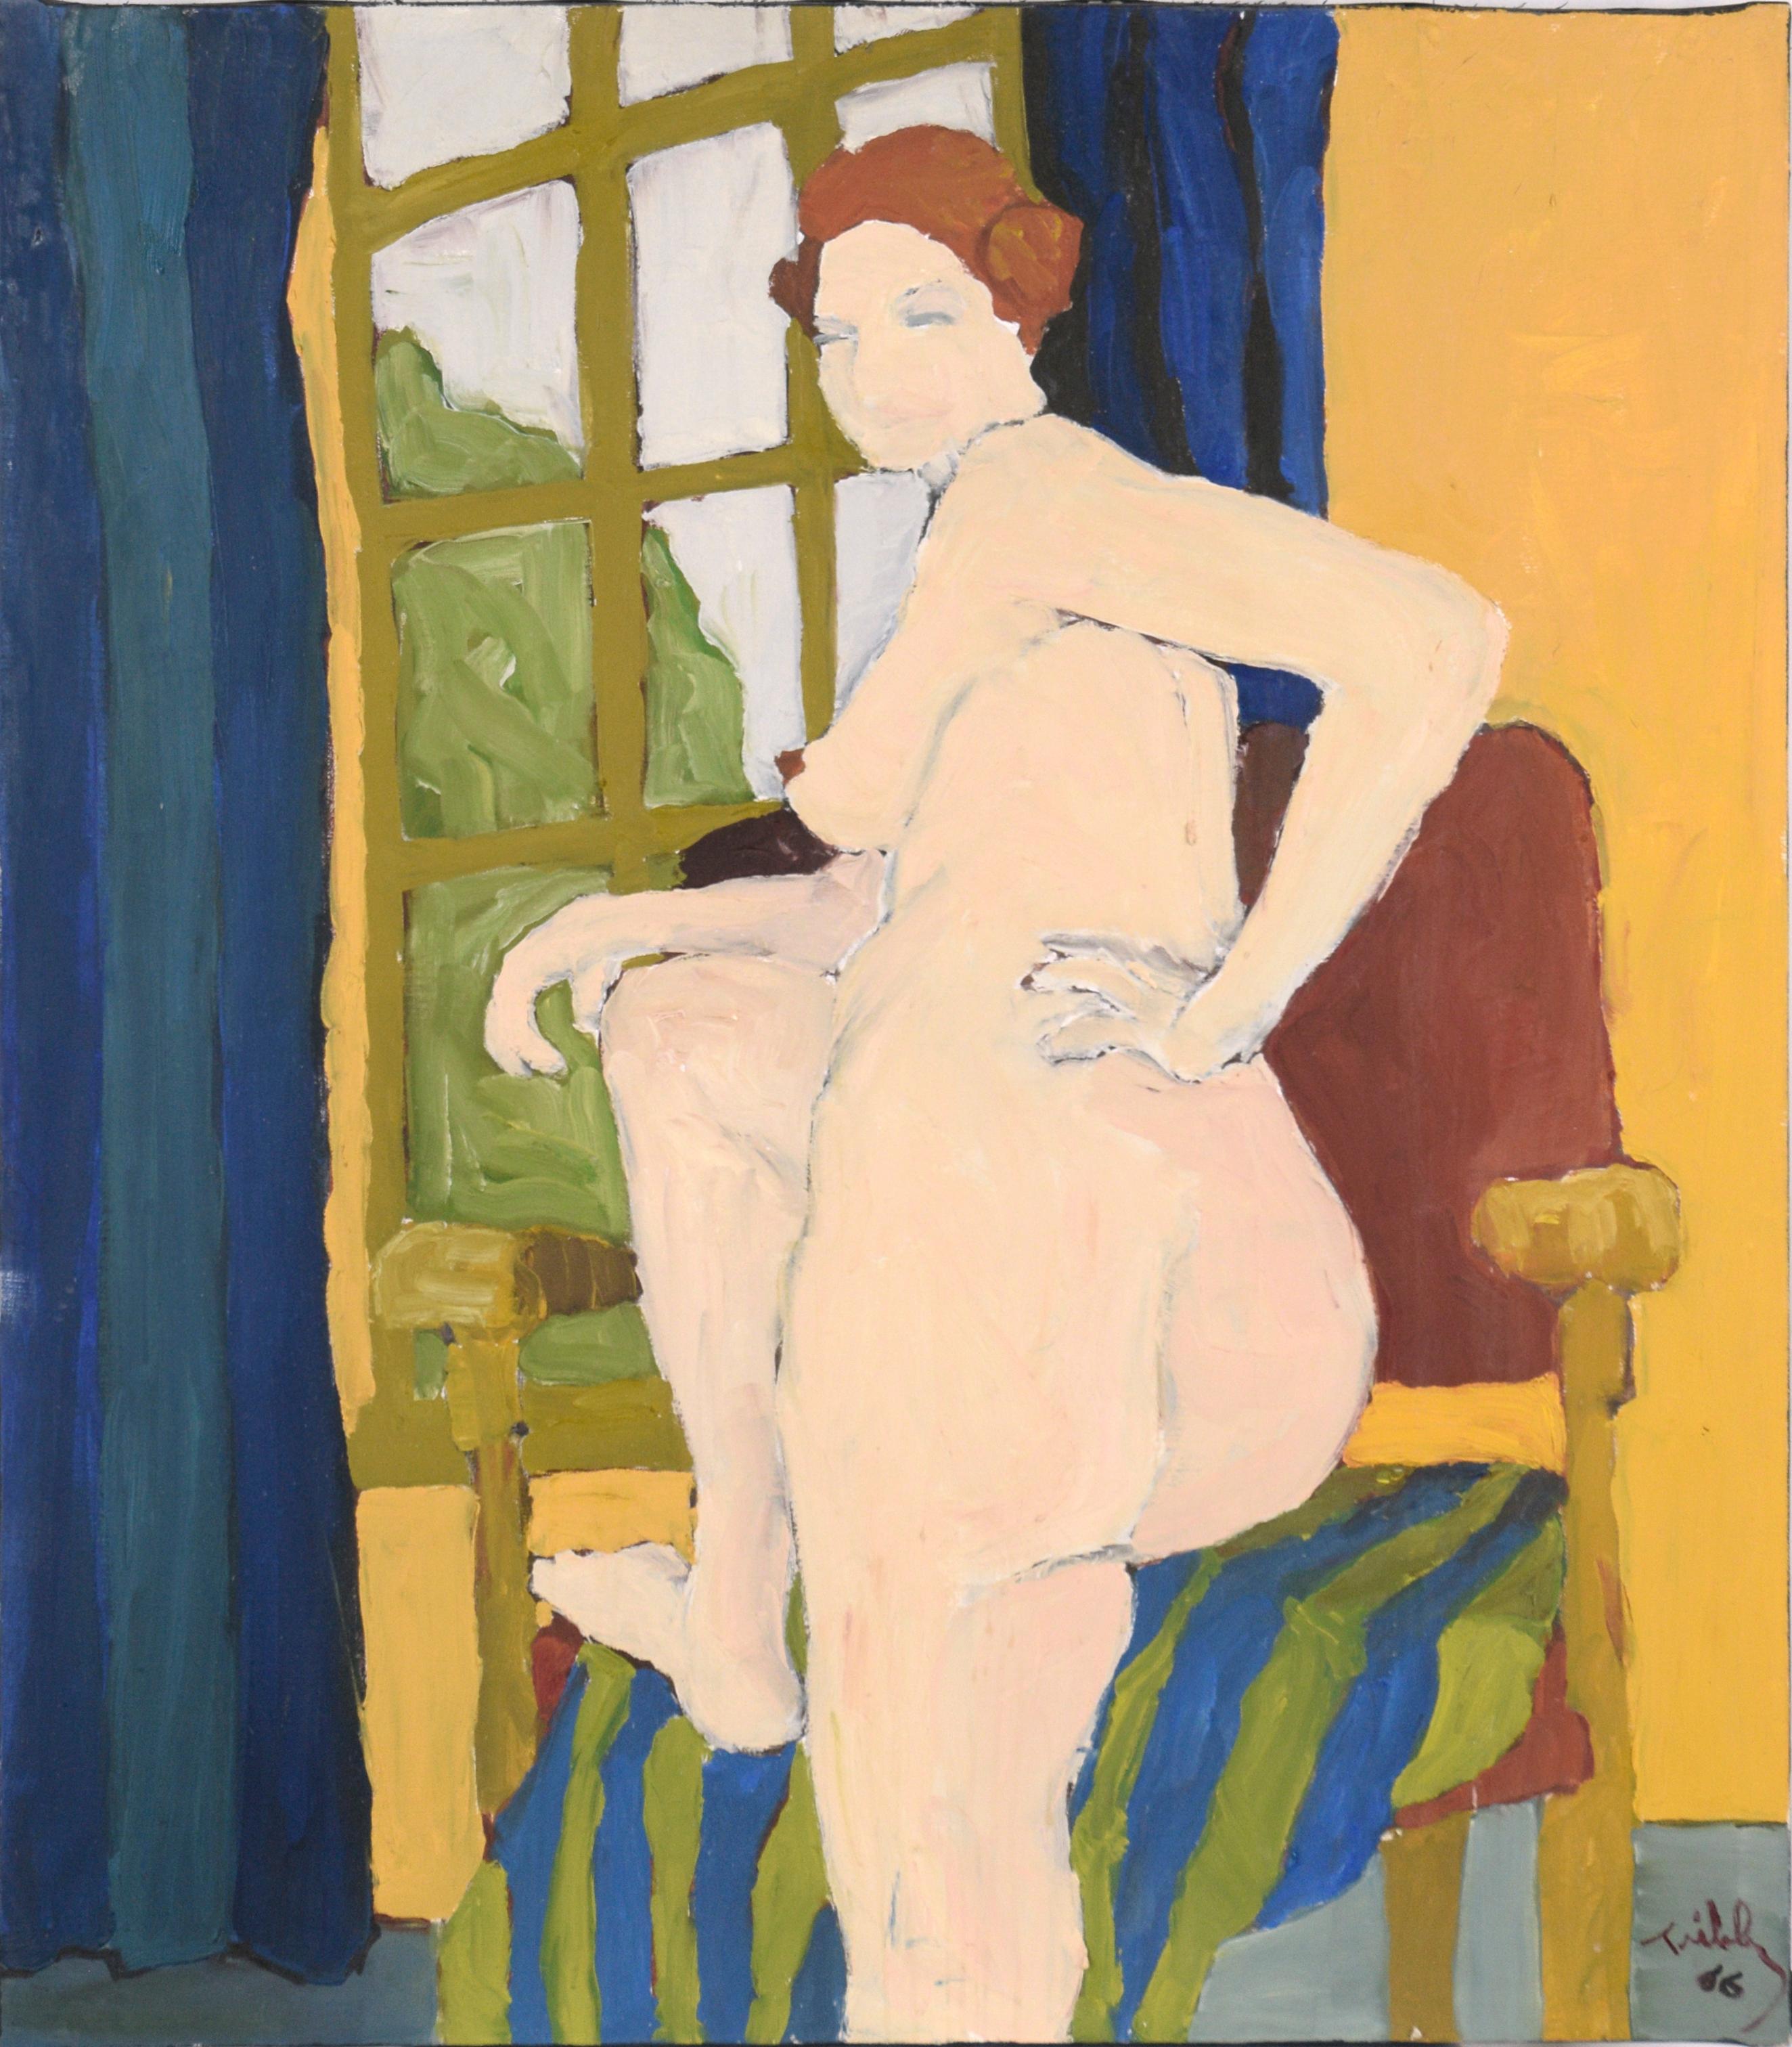 Nude by the Window, San Francisco Bay Area Figurative Movement 1966